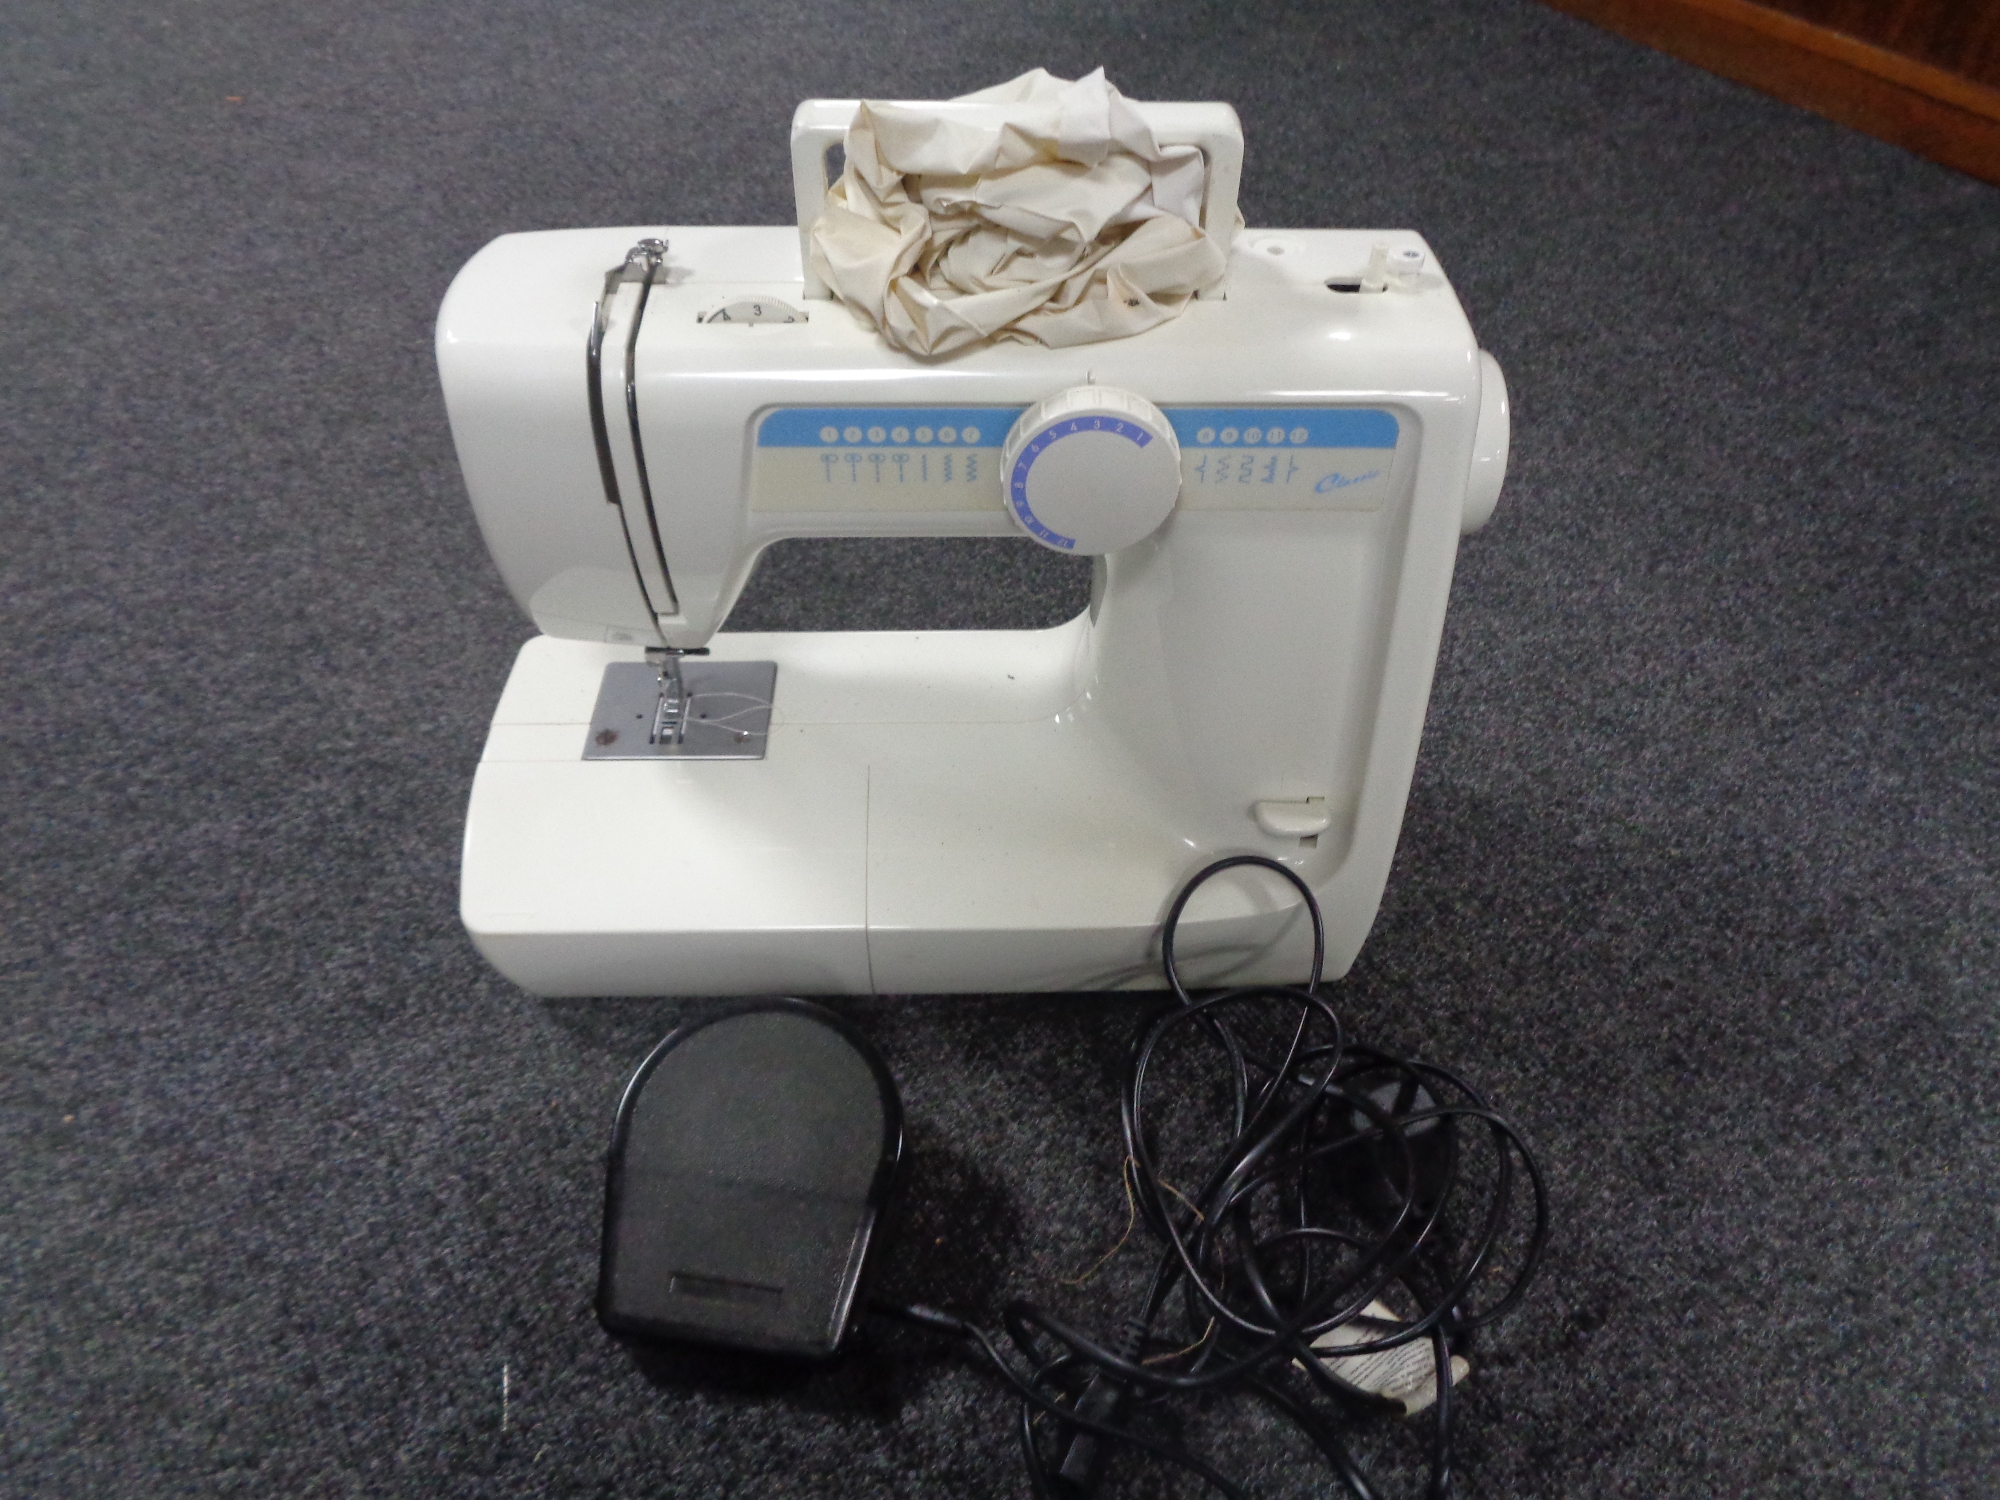 A Classic electric sewing machine with lead.